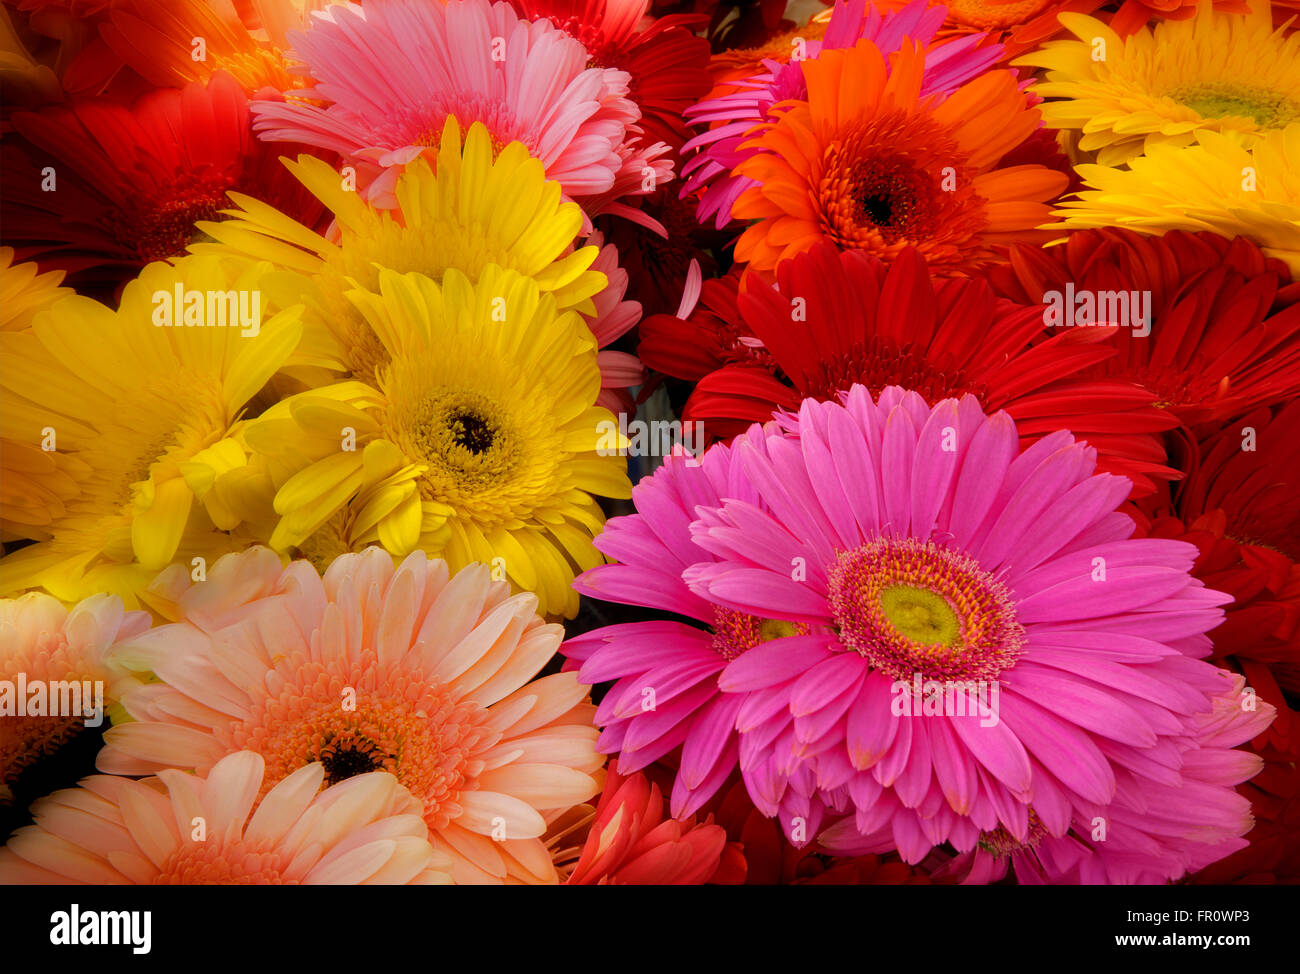 Mixture of Gerbera flowers at a farmers market in Los Angeles, California Stock Photo